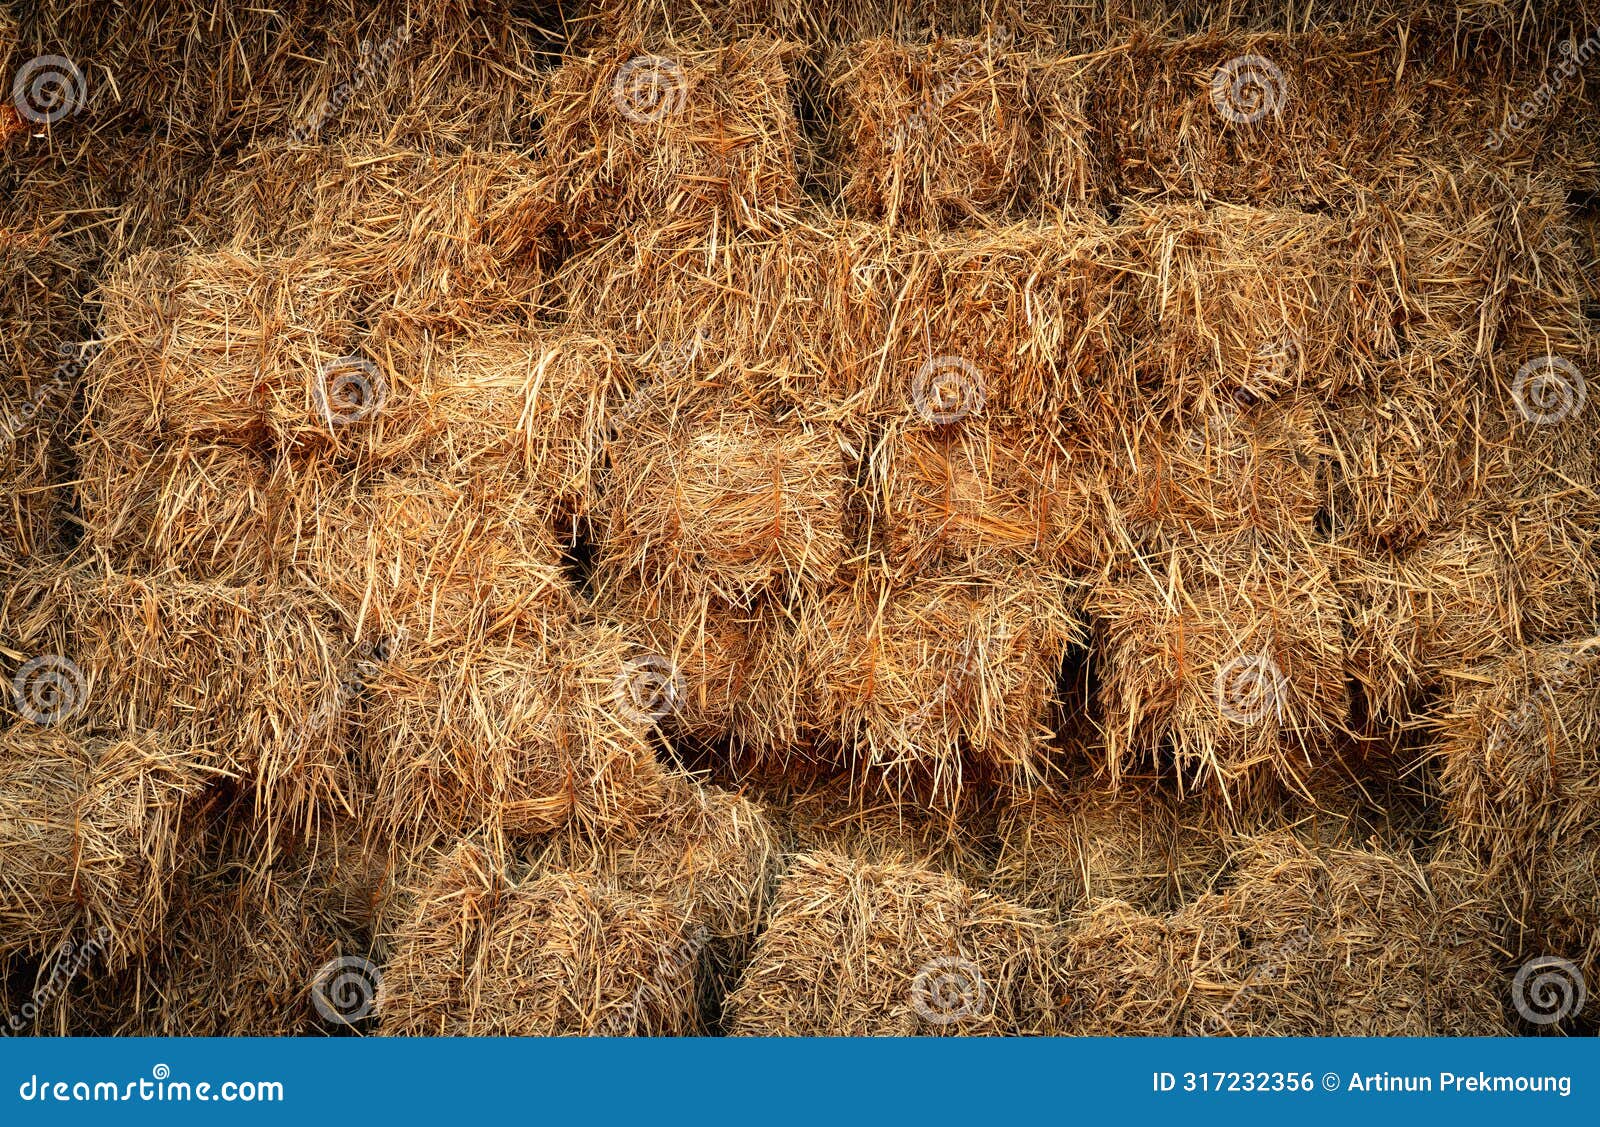 dry straw bale and agricultural byproducts. stacked yellow straw bales for animal fodder and livestock bedding. straw bales in